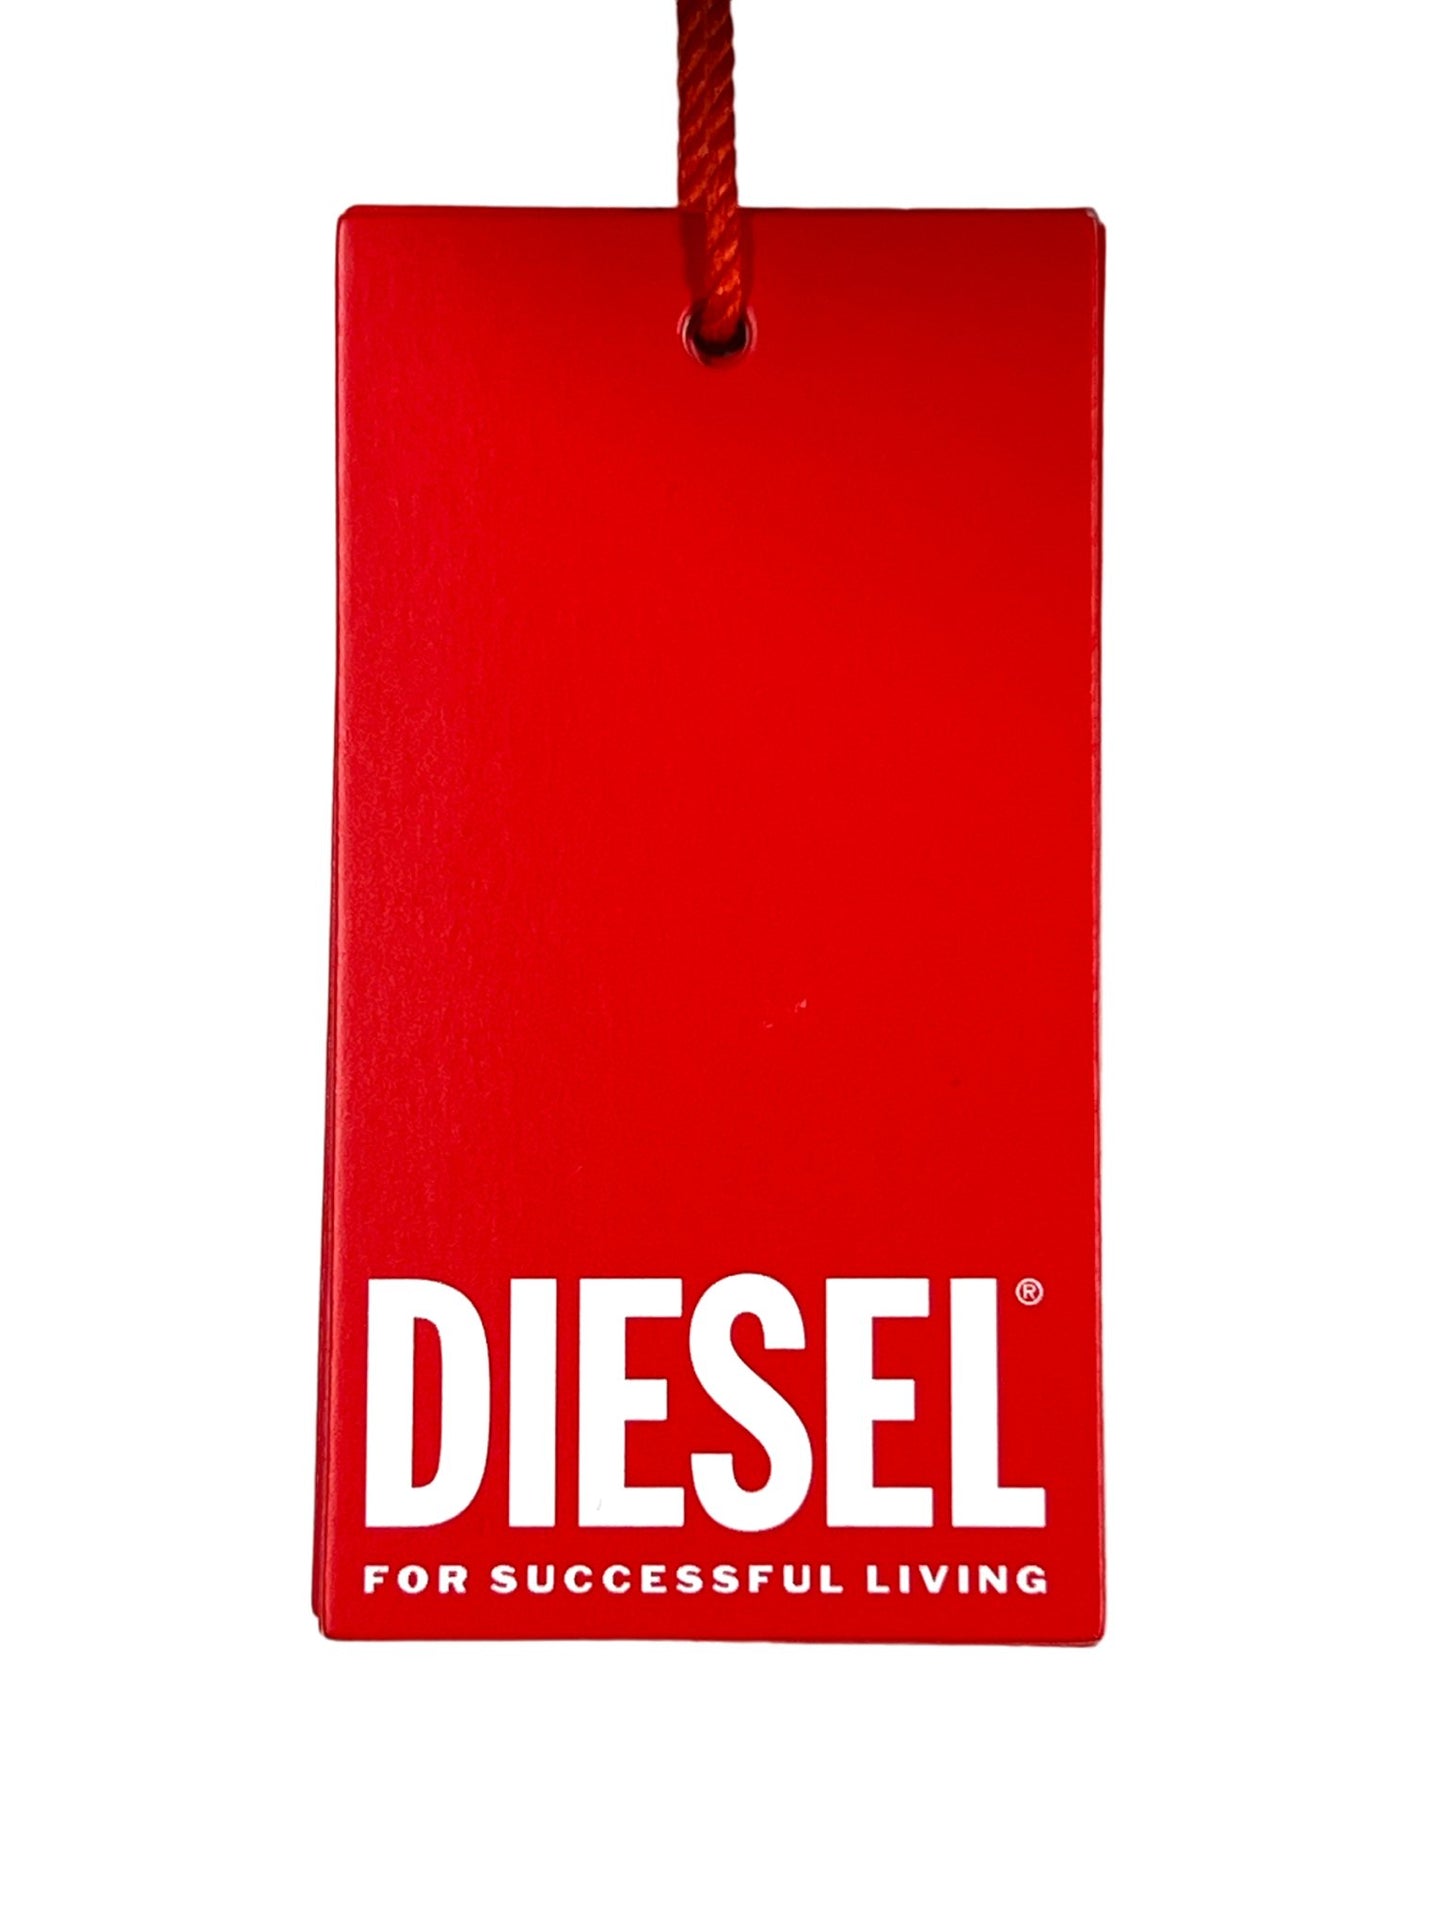 Red Diesel T-JUST-N12 T-shirt brand tag with the slogan "for successful living" on a black background, made from organic cotton jersey.